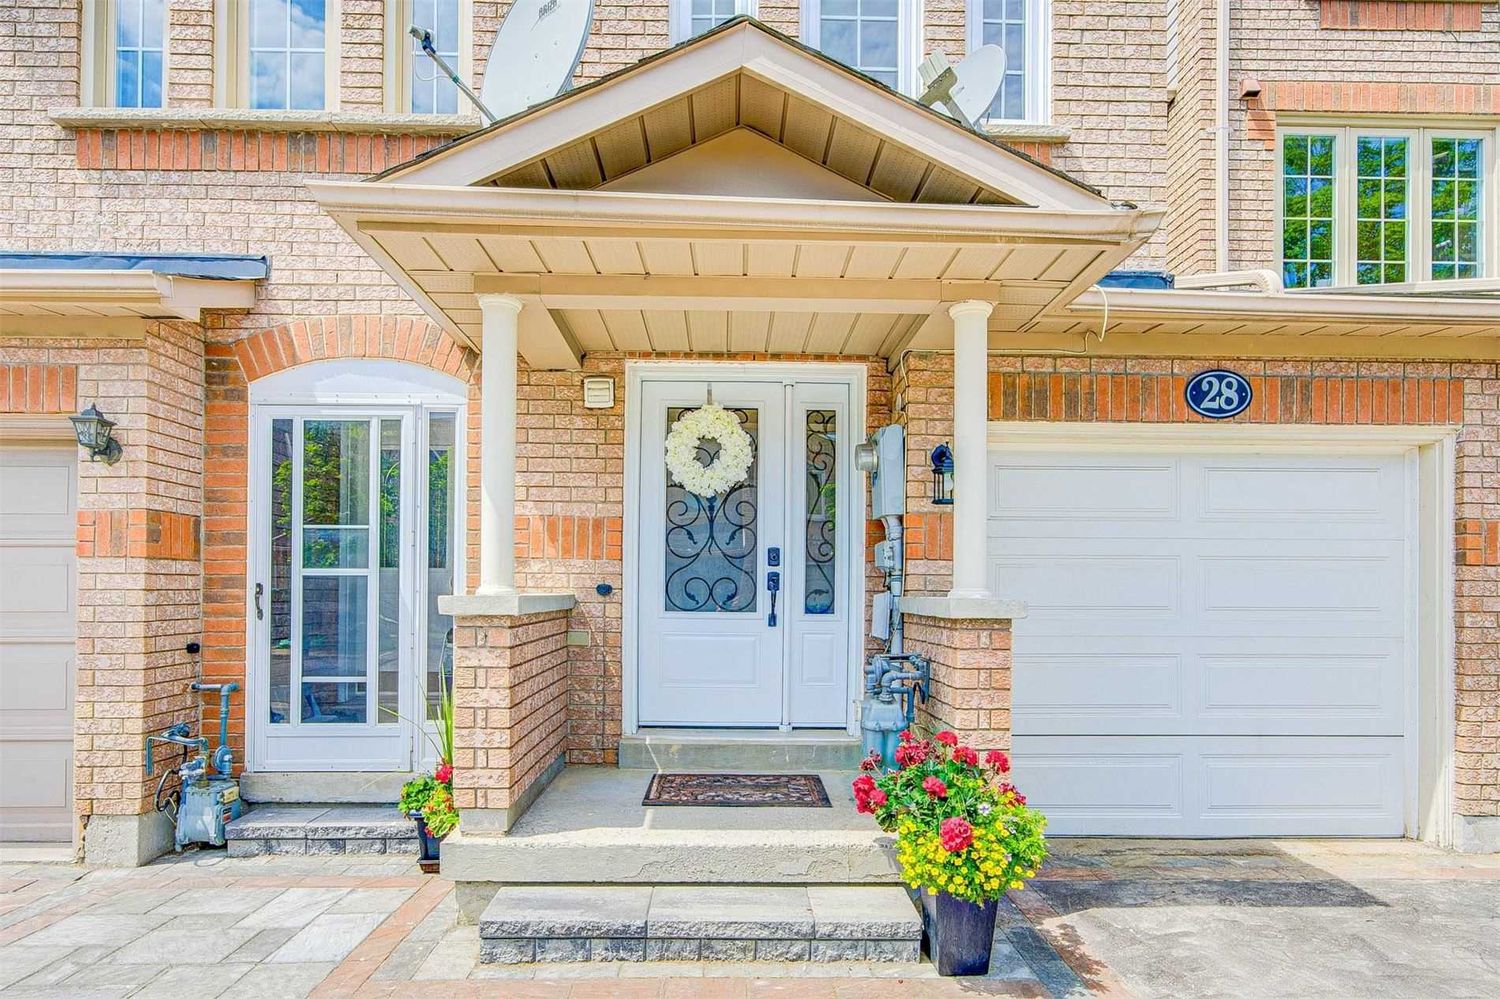 2-92 Tania Crescent. Tania Crescent Townhomes is located in  Vaughan, Toronto - image #3 of 3